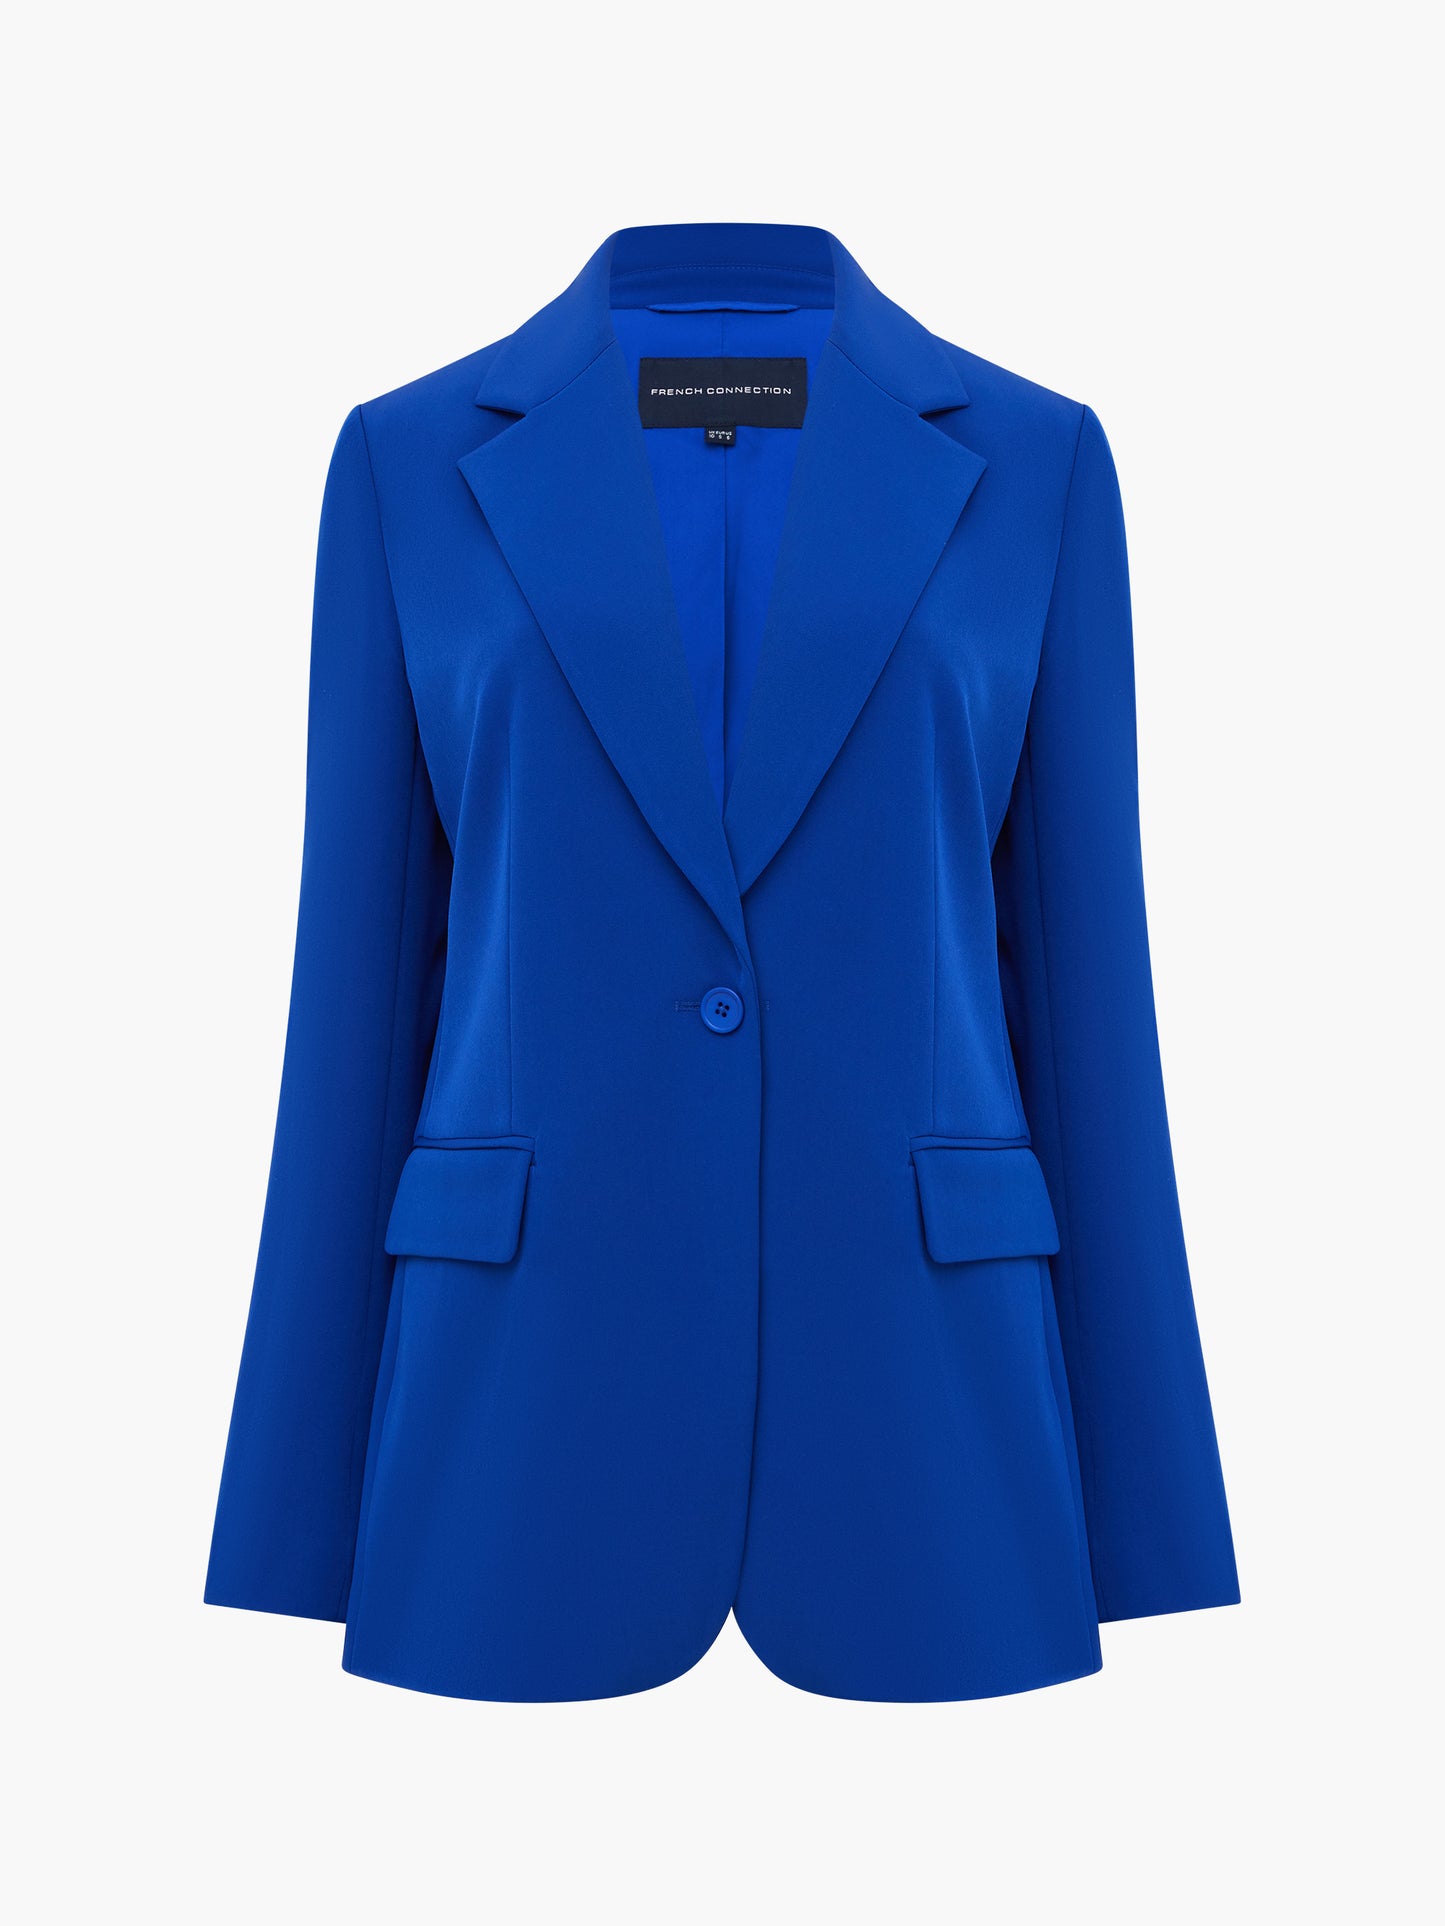 Echo Single Breasted Blazer - French Connection